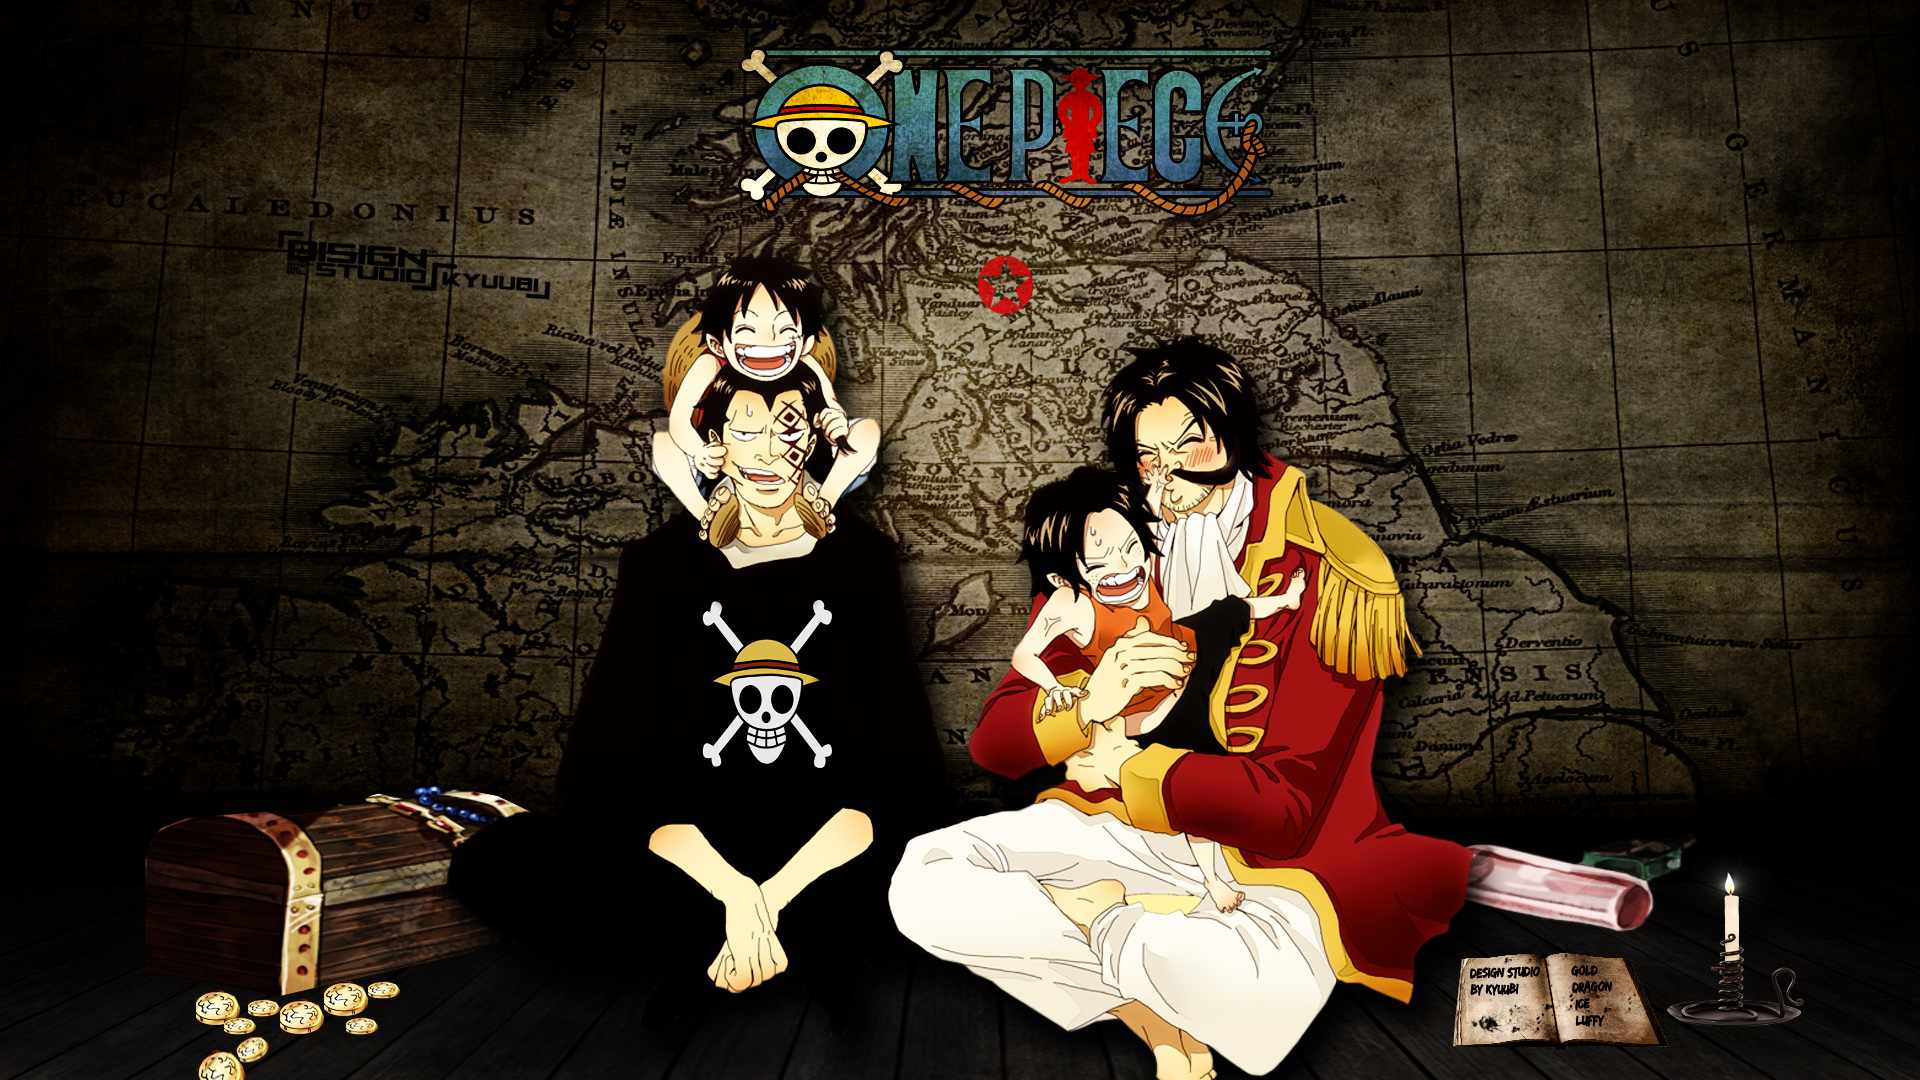 Free Download One Piece Iphone Wallpaper Hd 19x1080 For Your Desktop Mobile Tablet Explore 74 One Piece Phone Wallpaper One Piece Epic Wallpaper One Piece Iphone Wallpaper One Piece Anime Wallpapers